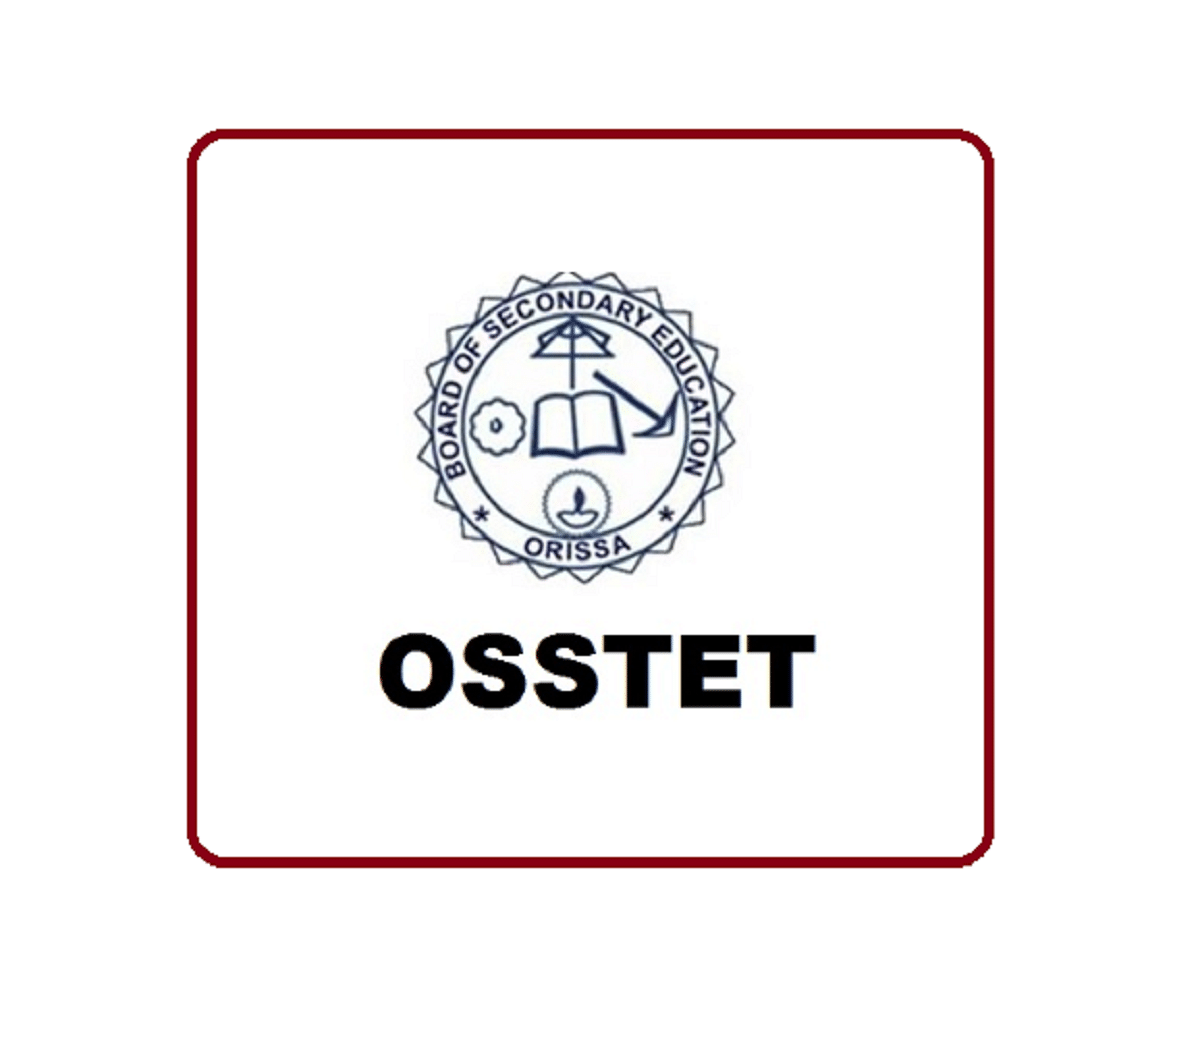 Last Day to Apply for OSSTET 2019 Today, Check Exam Details Here